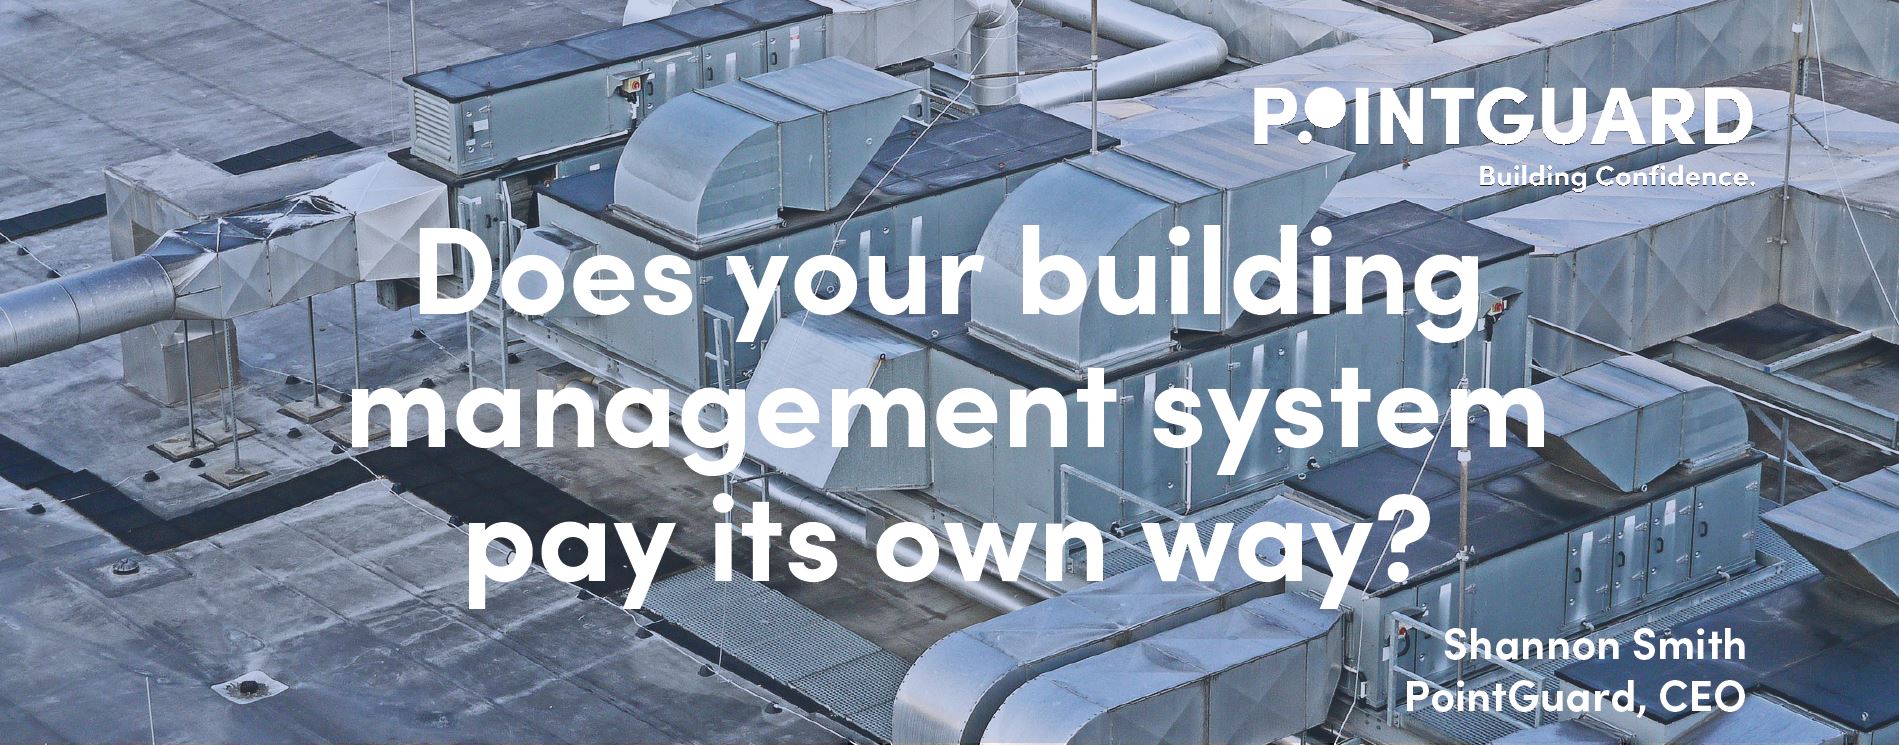 Does your building management system pay its own way?